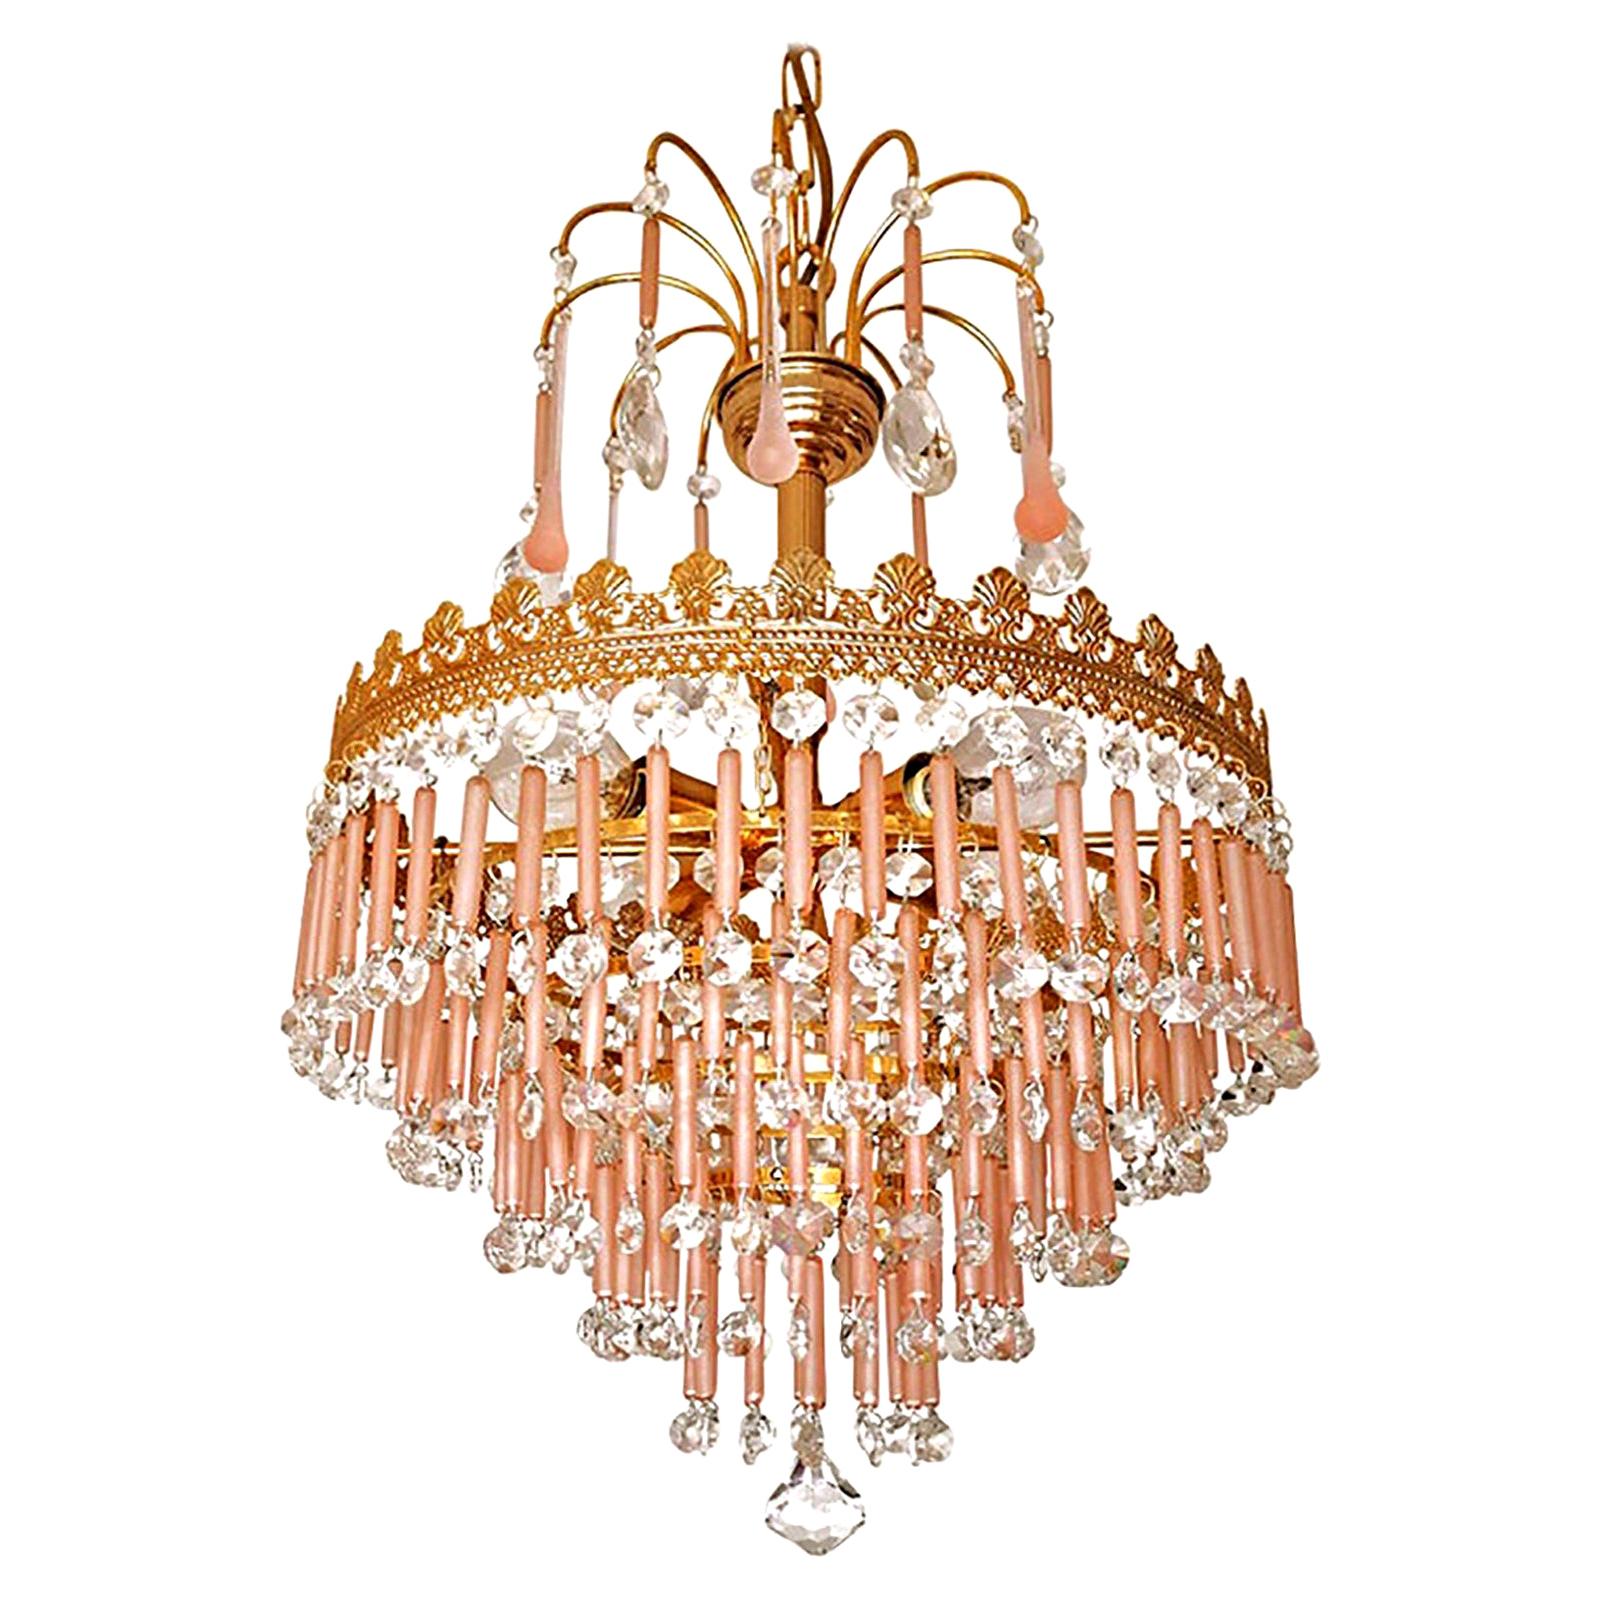 Gilt Hollywood Regency Wedding Cake Chandelier in Pink Murano Glass and Crystal